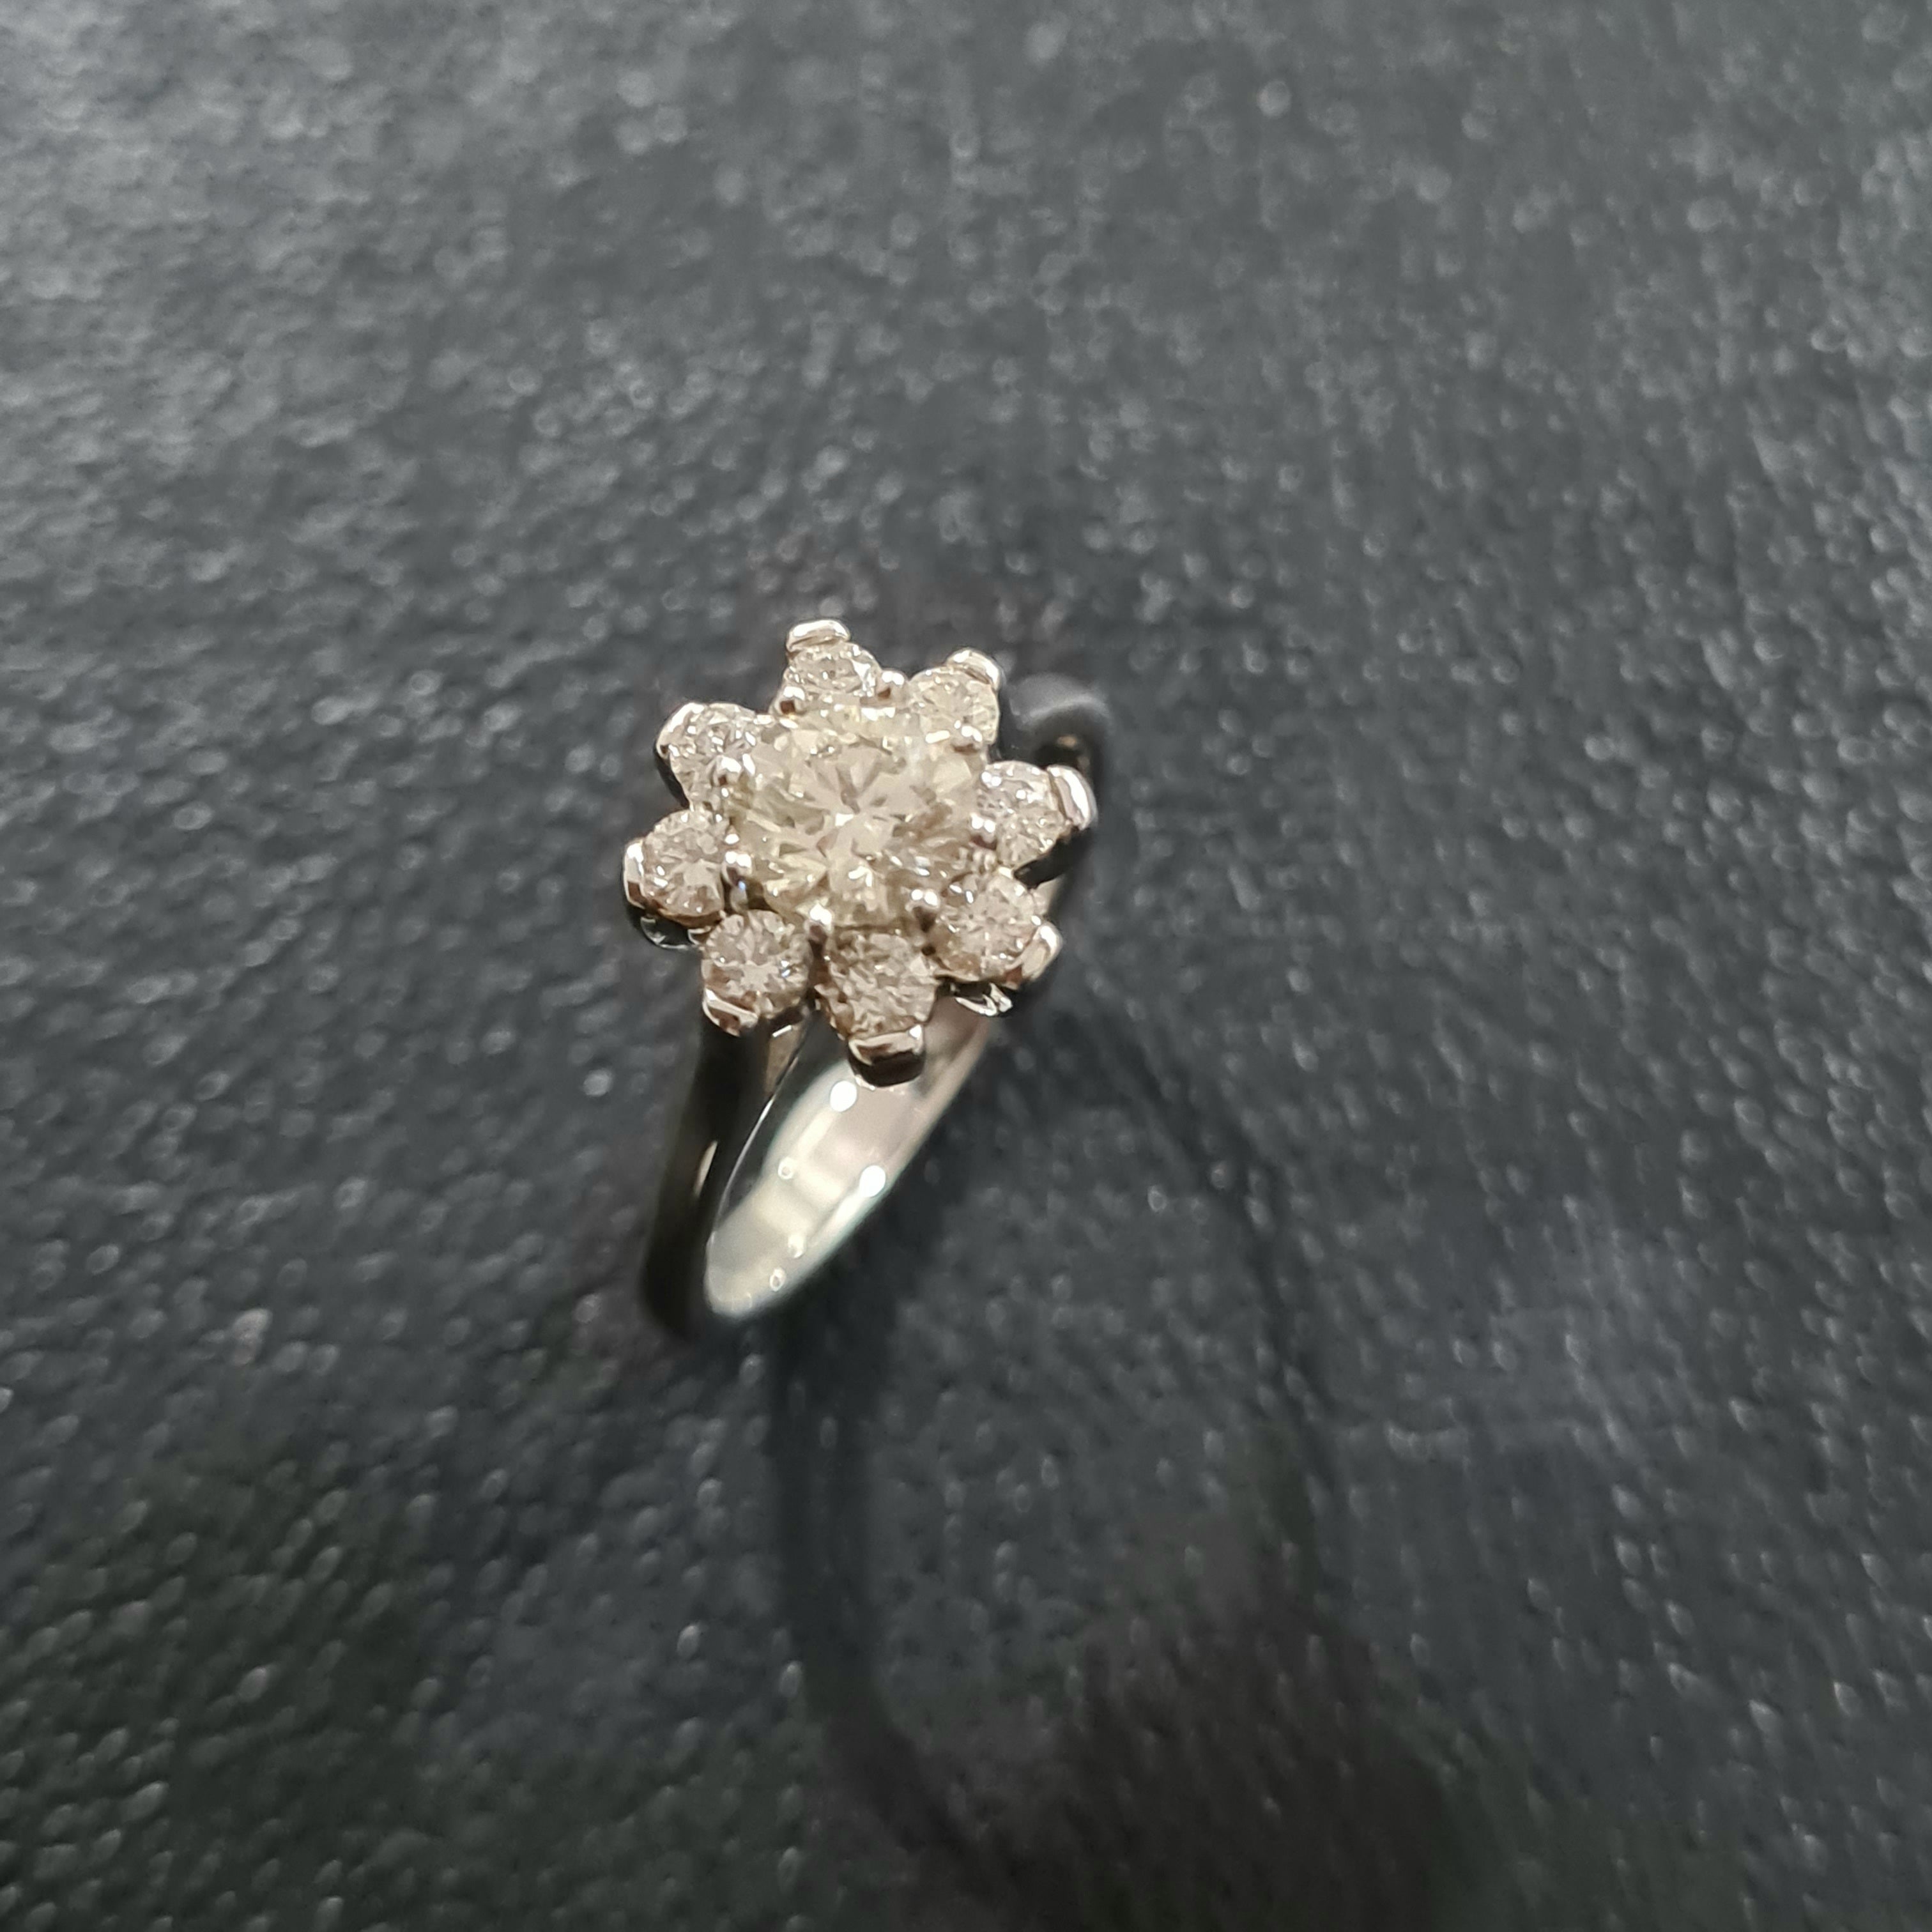 Floral Diamond Engagement Ring